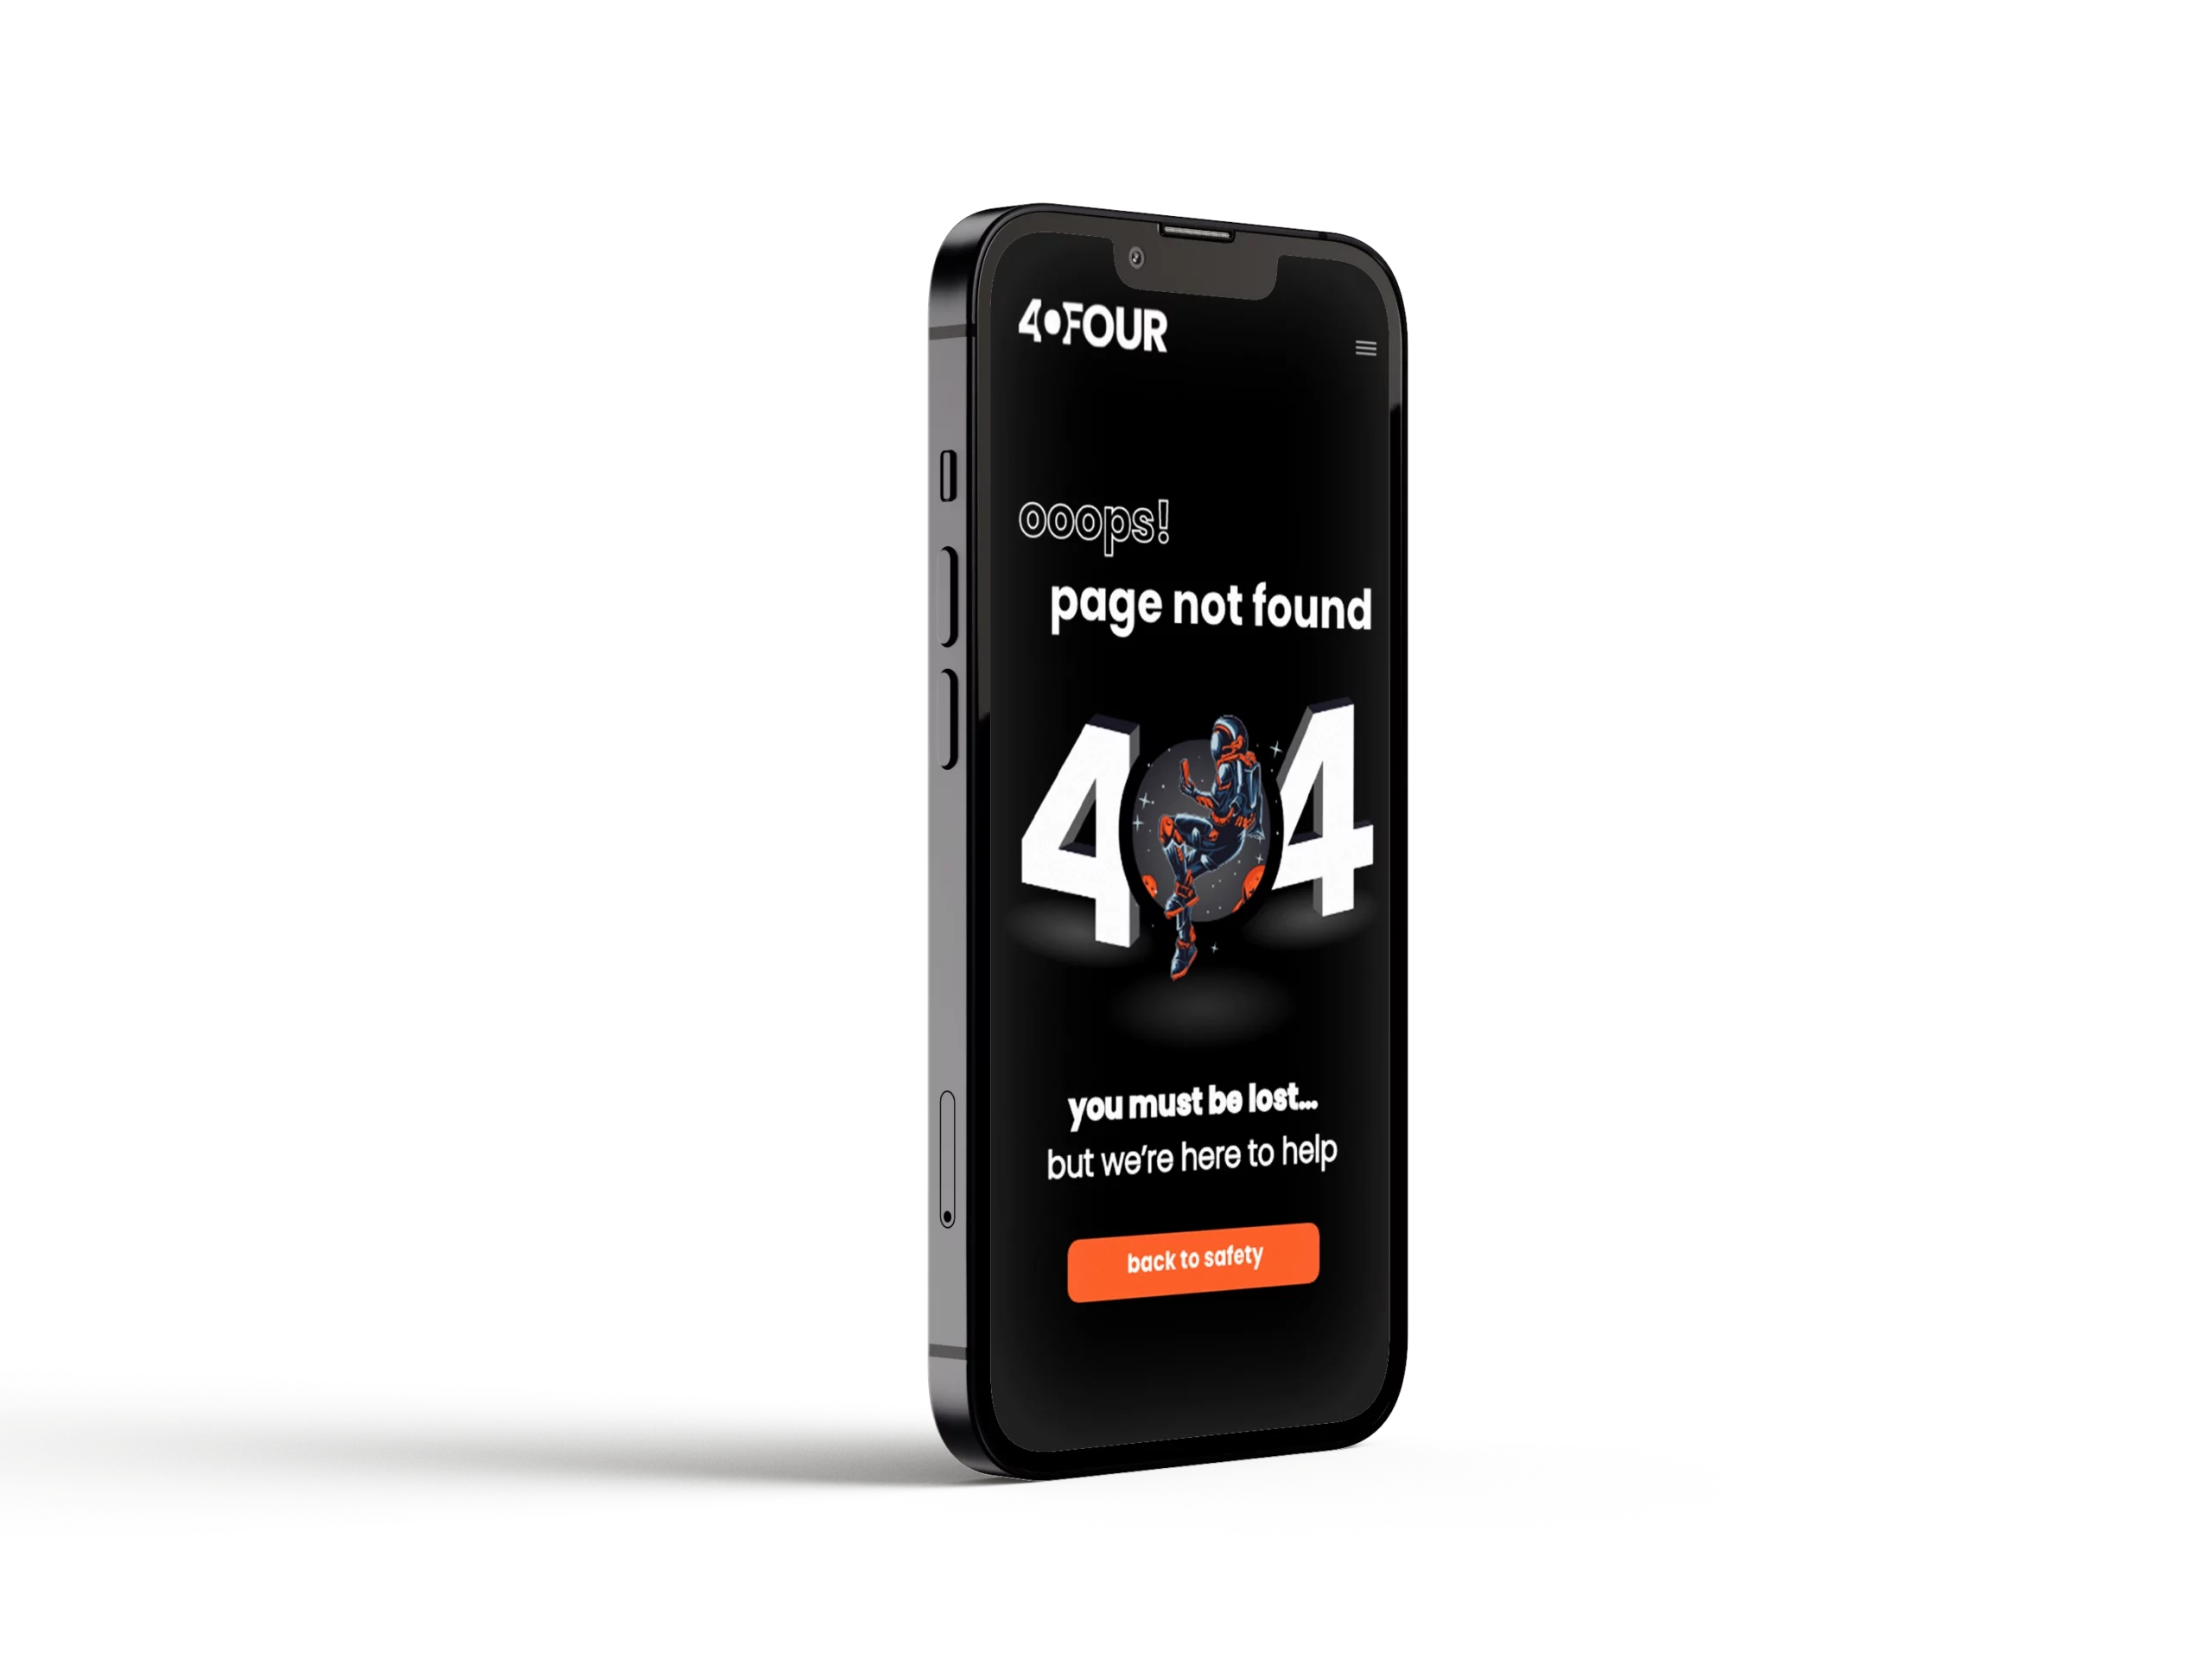 404 Marketing error page mocked up on a mobile phone